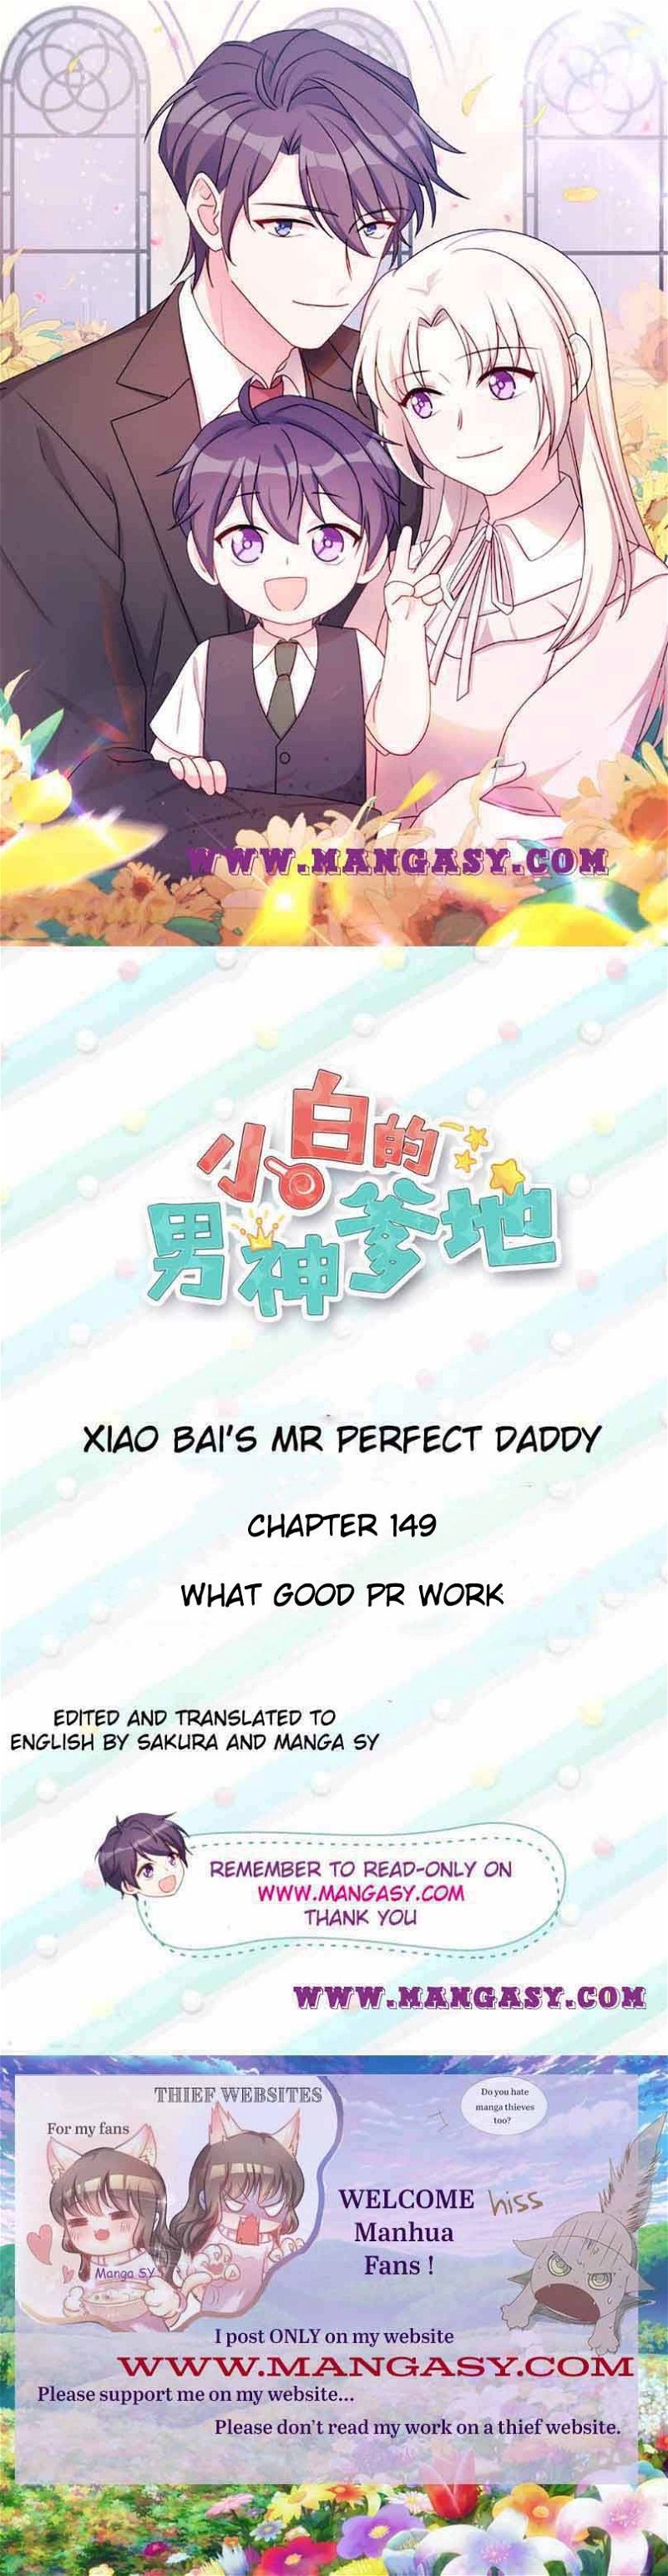 Xiao Bai’s father is a wonderful person Chapter 149 - Page 0